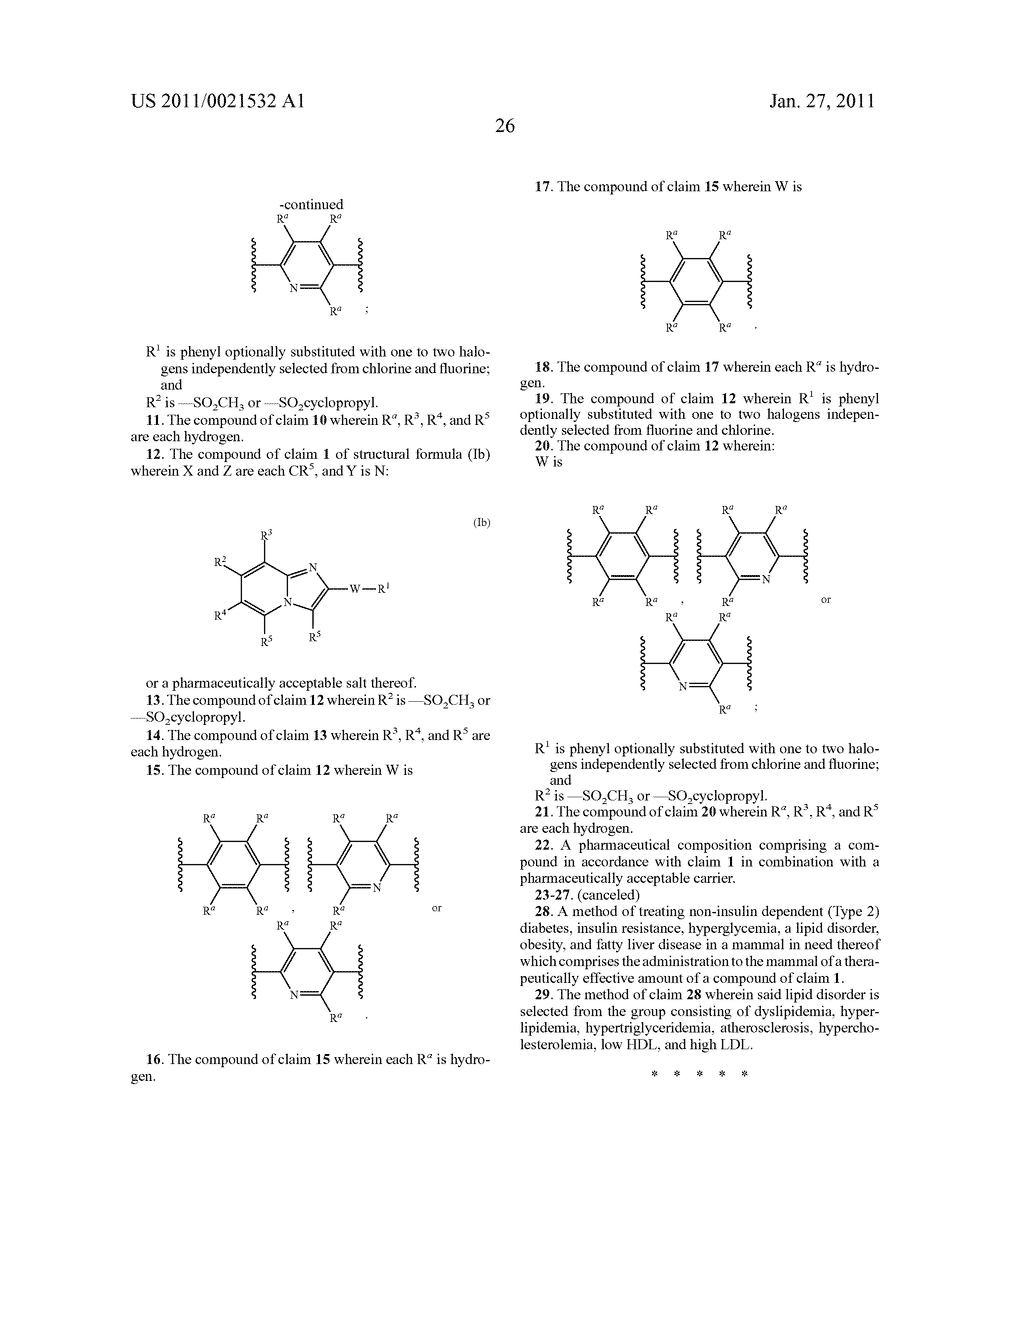 NOVEL SUBSTITUTED HETEROAROMATIC COMPOUNDS AS INHIBITORS OF STEAROYL-COENZYME A DELTA-9 DESATURASE - diagram, schematic, and image 27